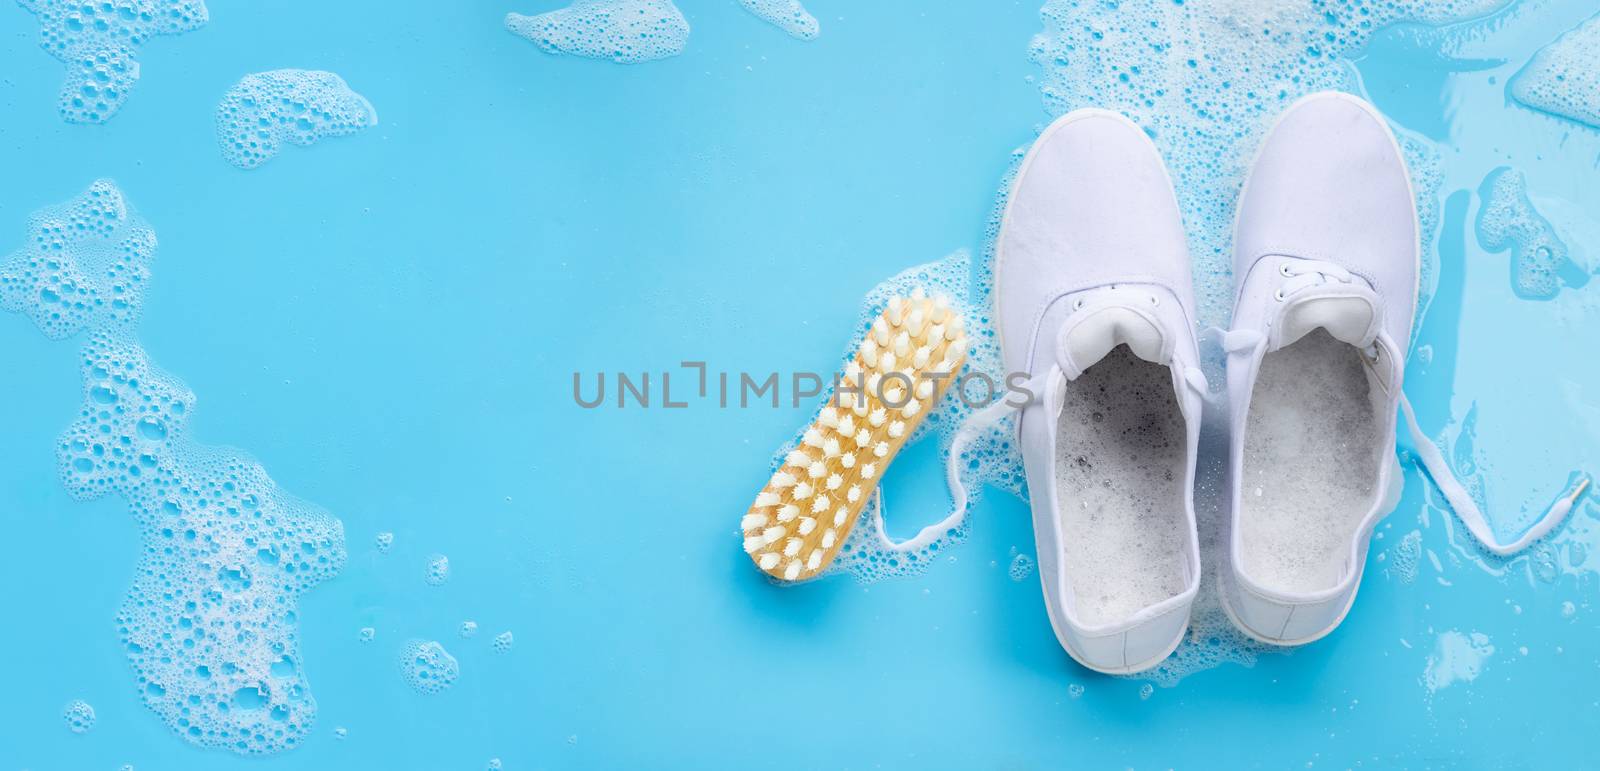 Sneakers with foam of powder detergent water dissolution and woo by Bowonpat